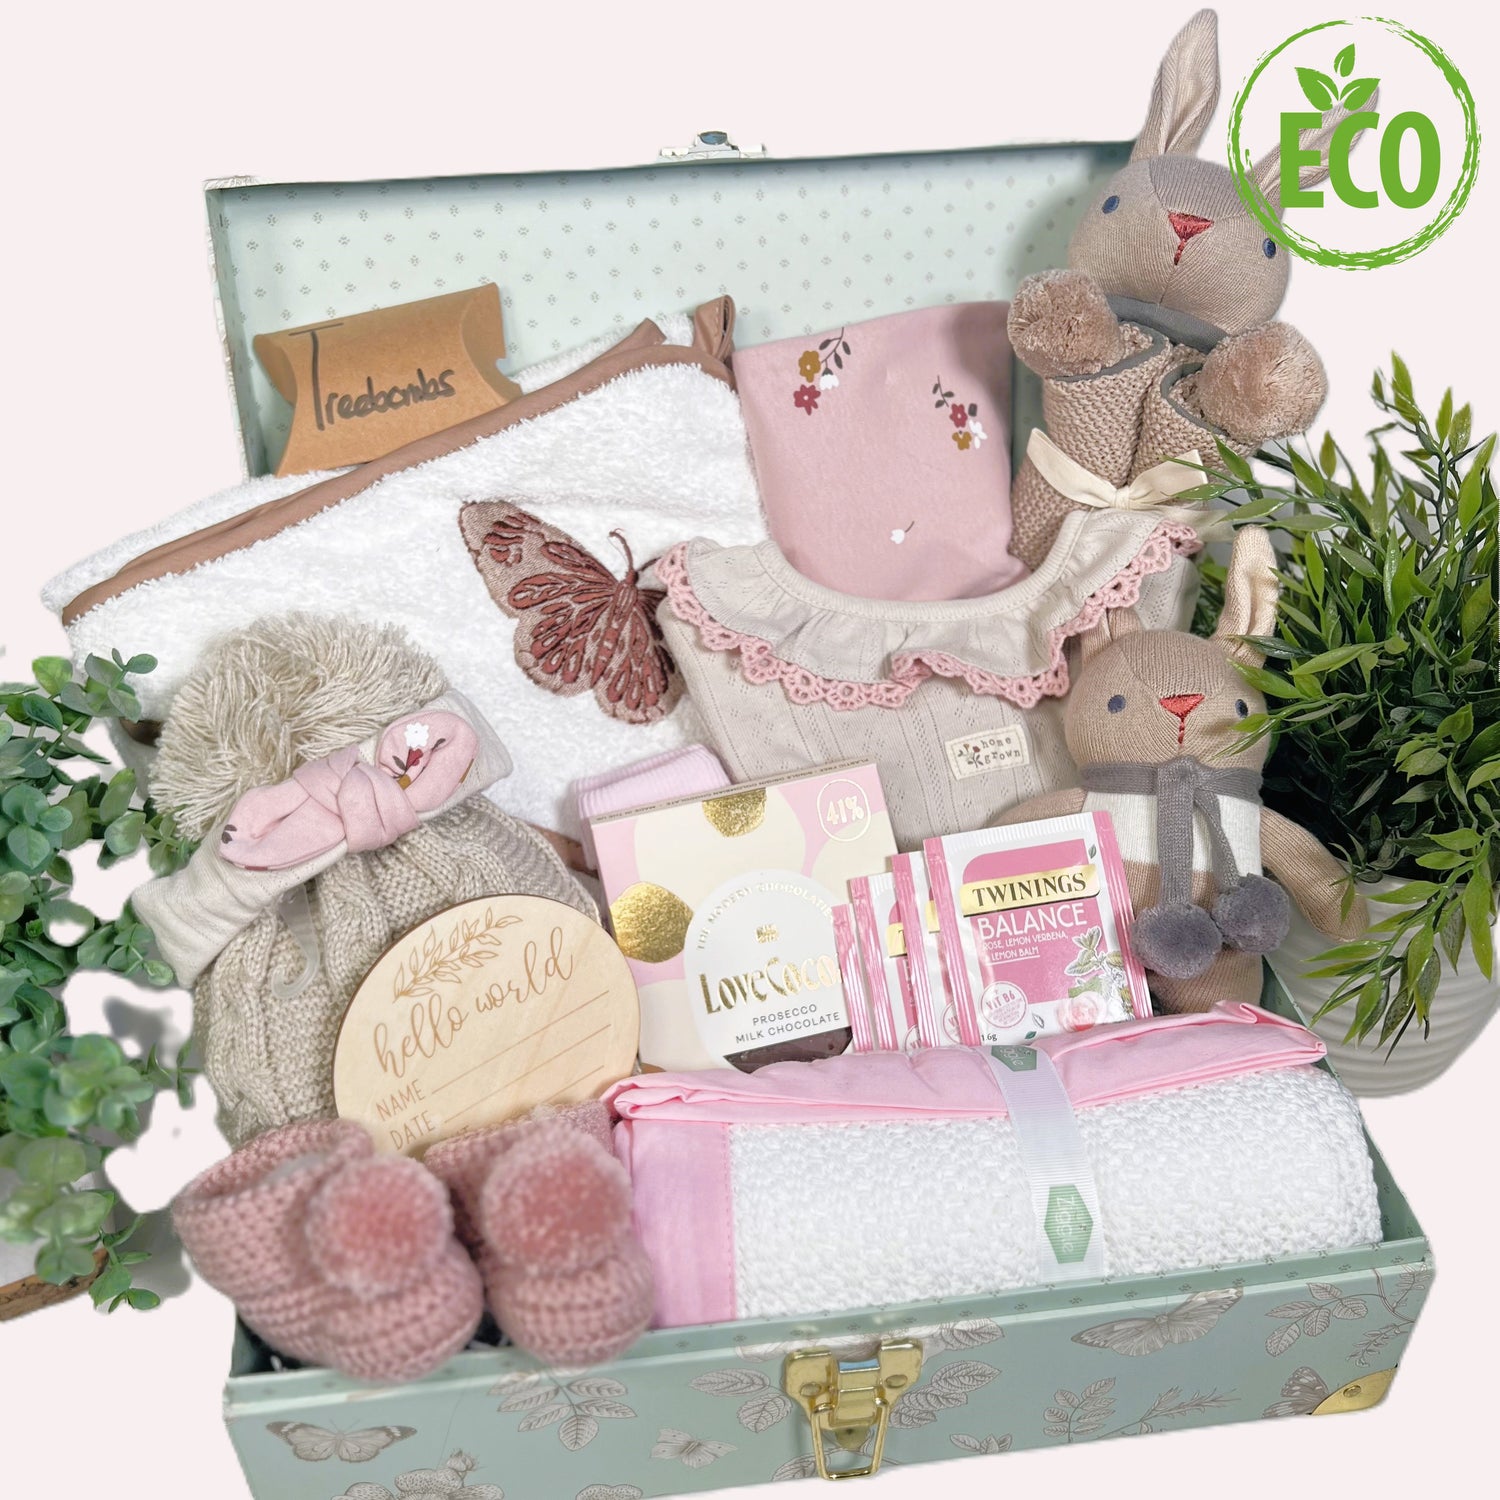 This baby girl hamper is full of Eco friendly new baby esstentisl including organic cotton baby layette set, cotton hooed baby towel, soft baby toys, a cotton baby blanket, crocheted baby booties and treats for the new mummy